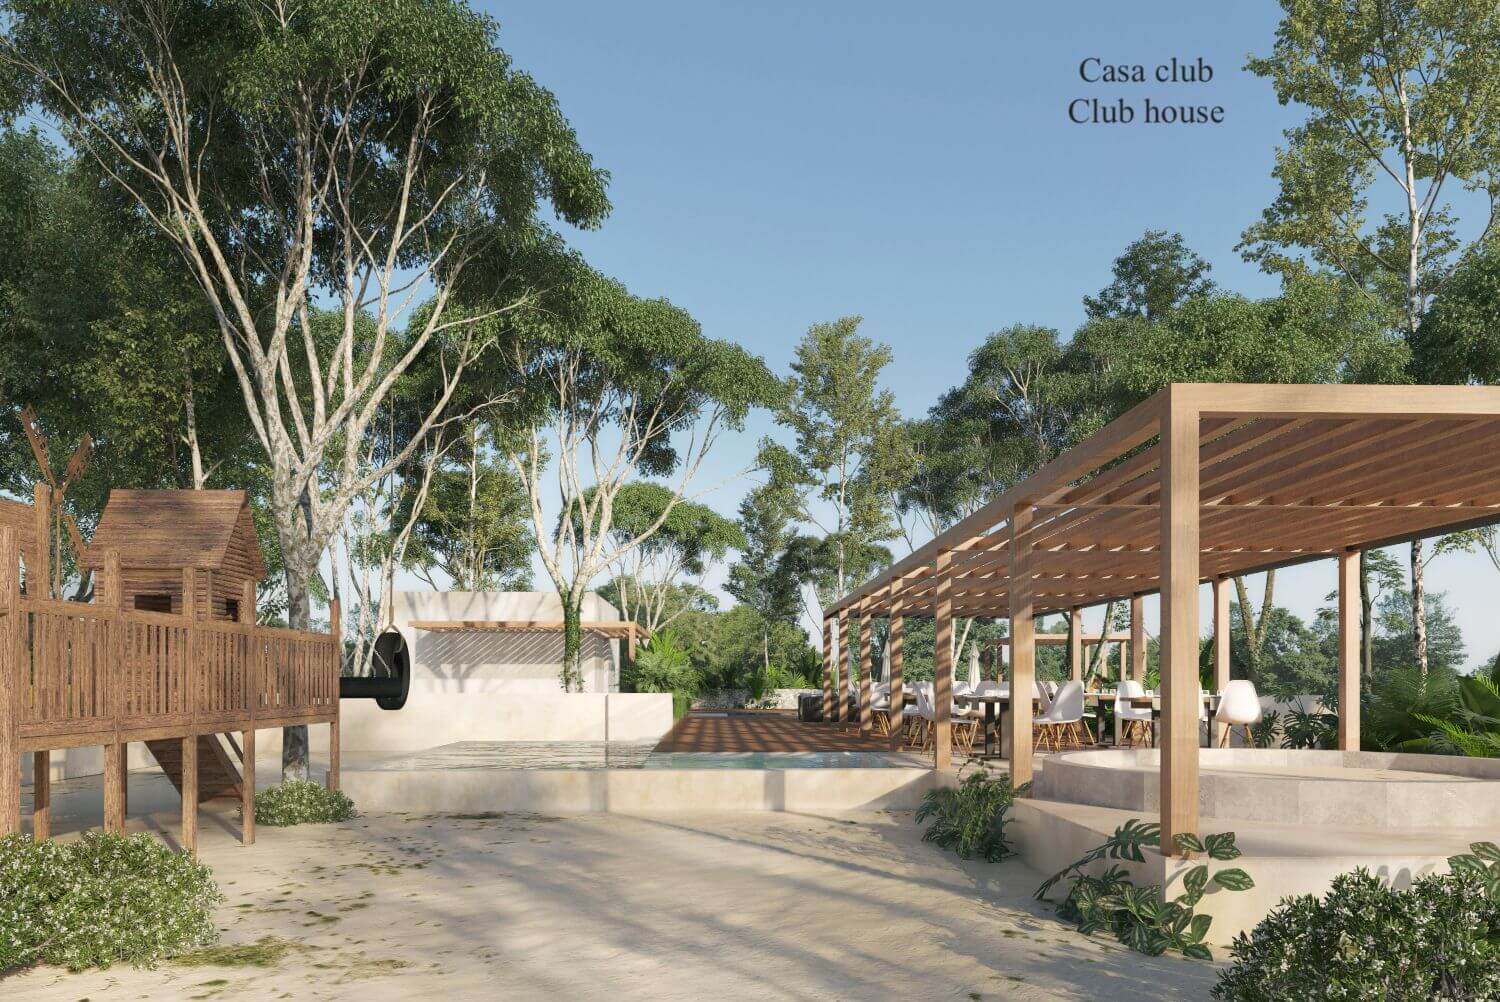 Villa with private pool and garden, more than 20 uniquely designed amenities, in Gated community Kaybe for sale Tulum.